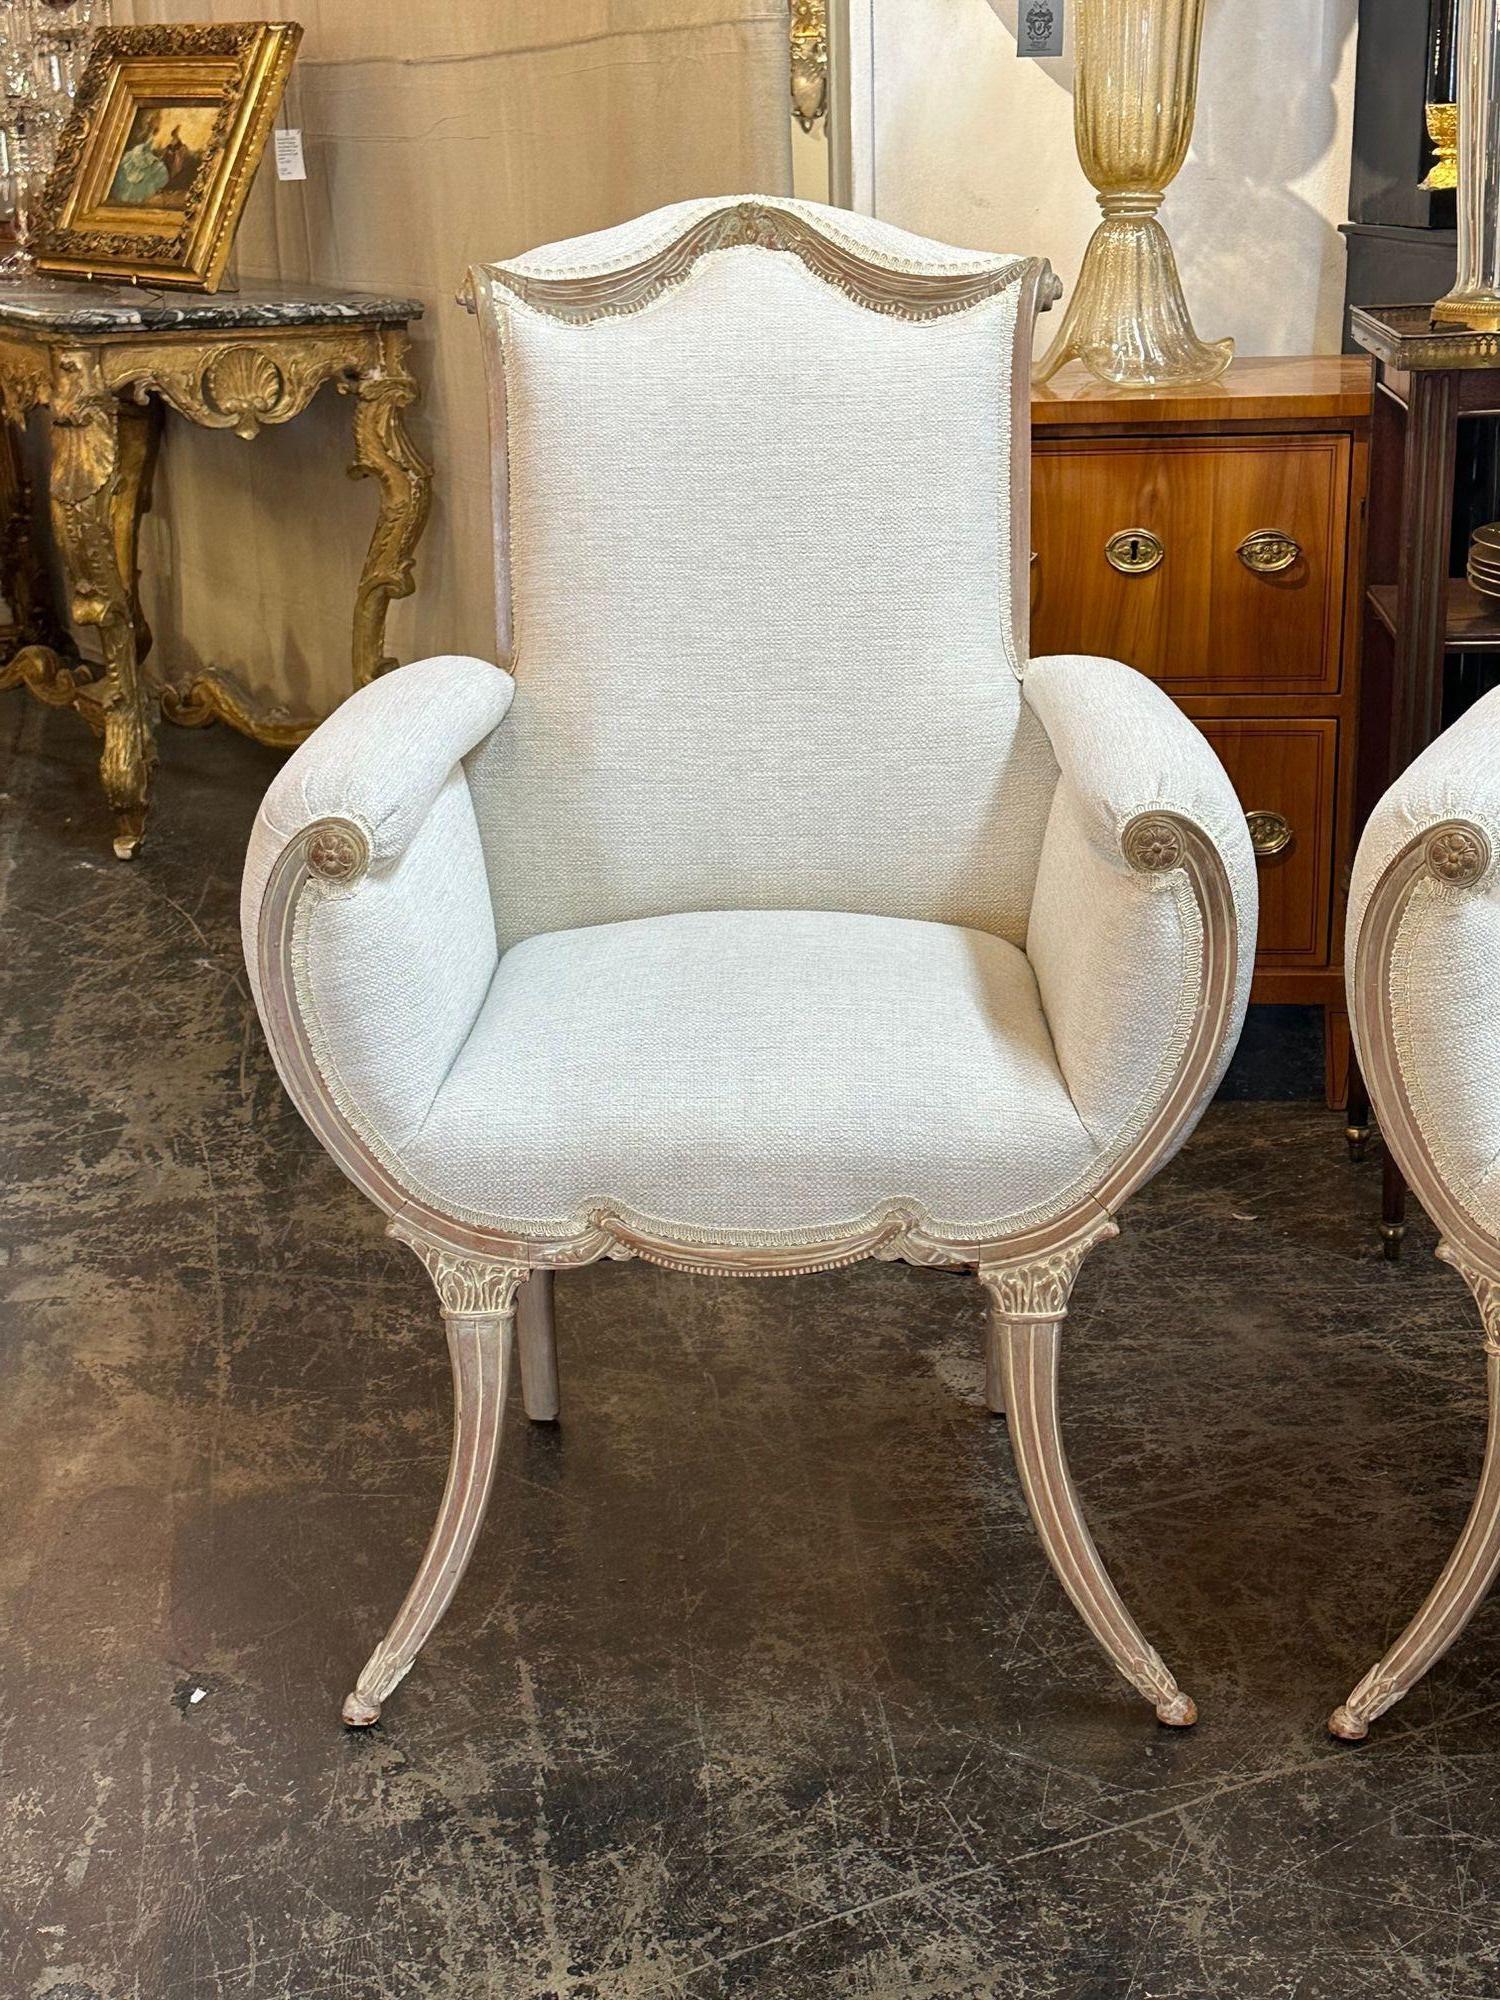 Pair of early 20th century English Adams style carved and white washed arm chairs, circa 1920. Perfect for today's transitional designs!